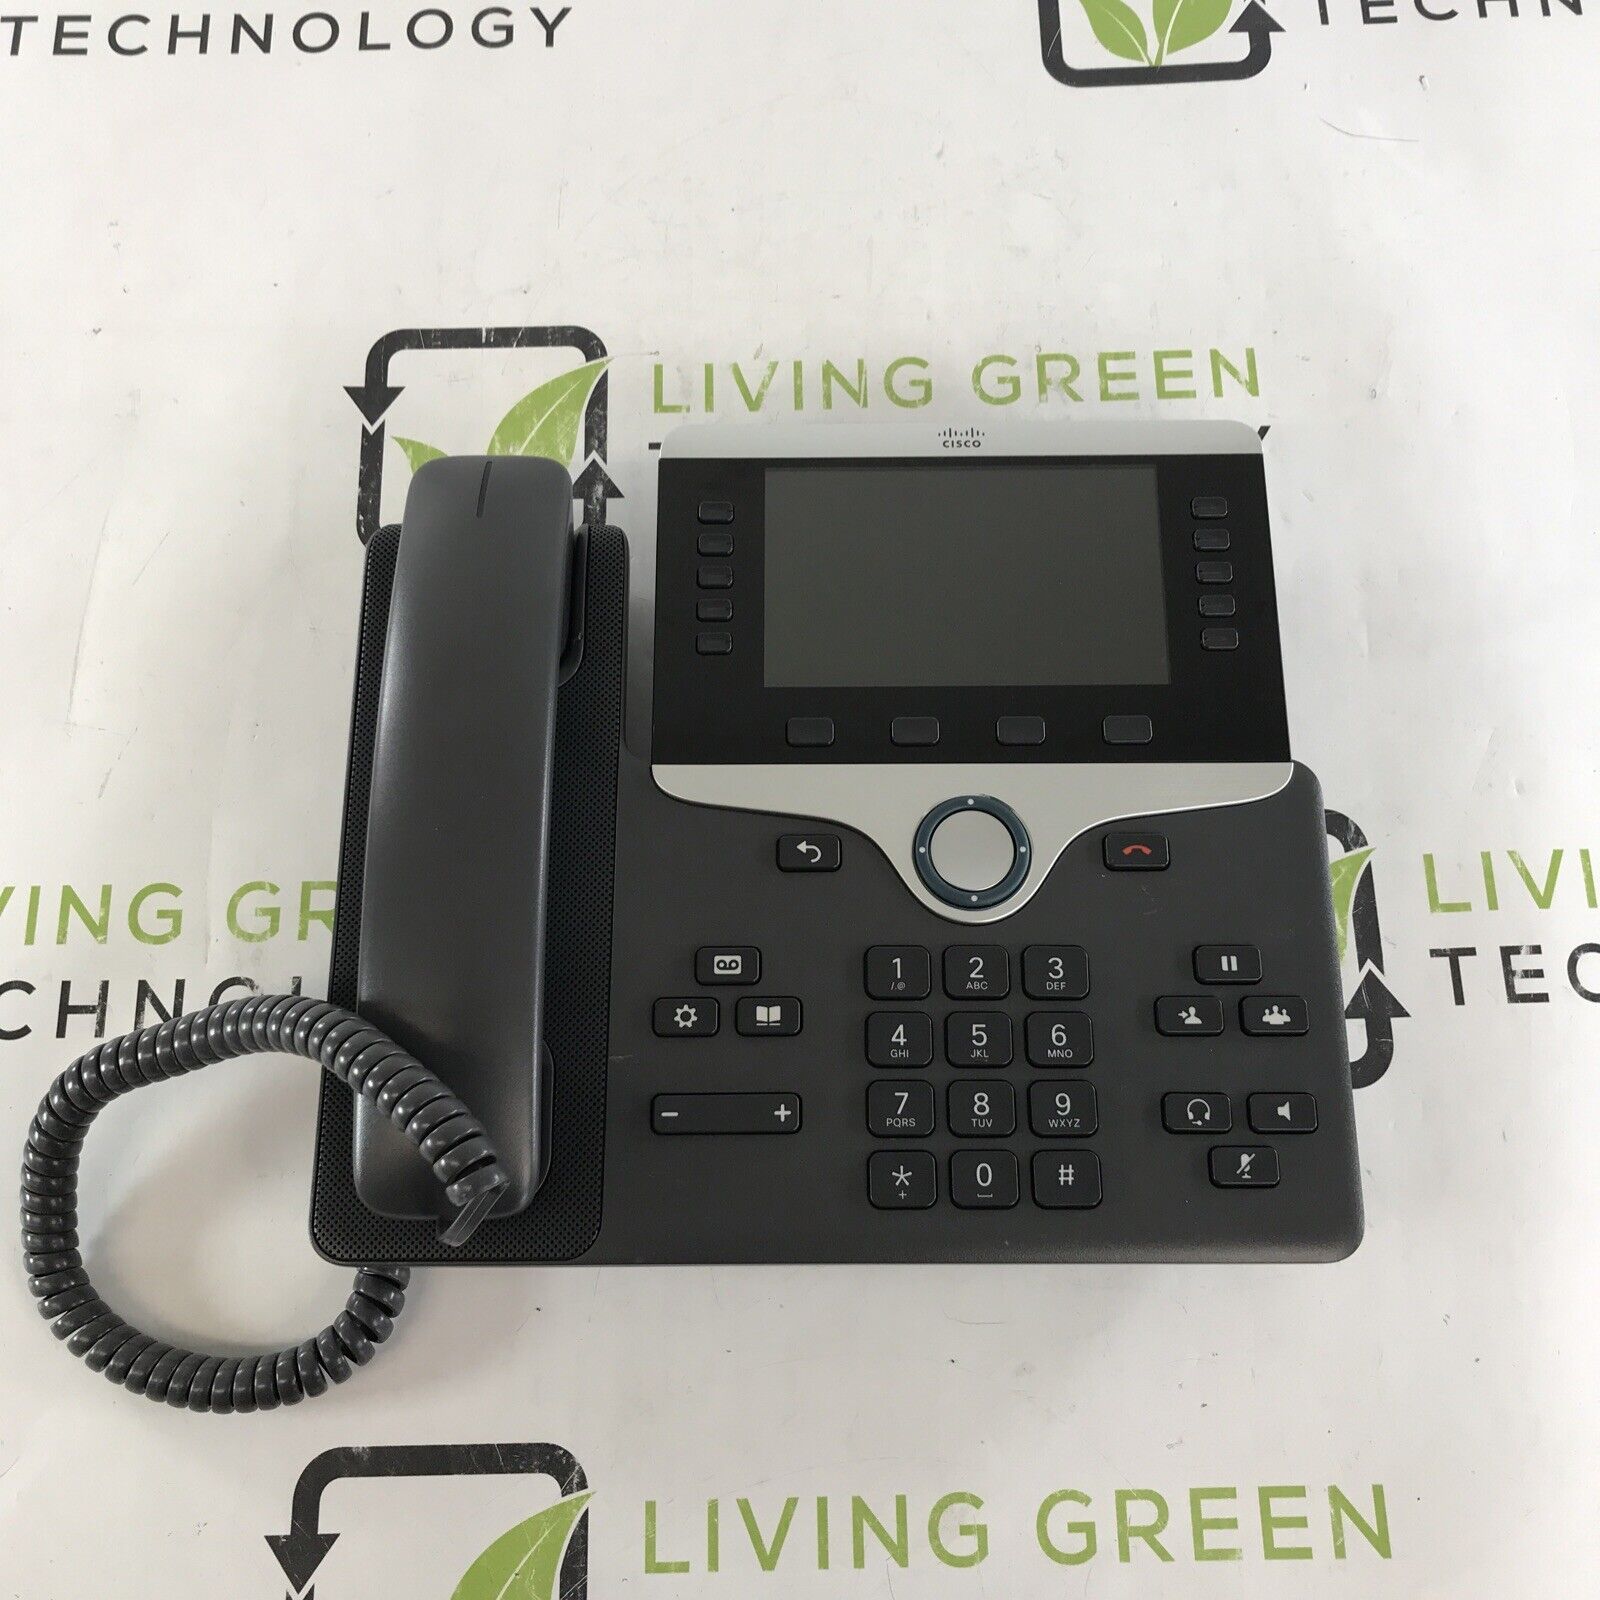 Cisco CP-8851-K9 IP Phone base and handset only. *USED*